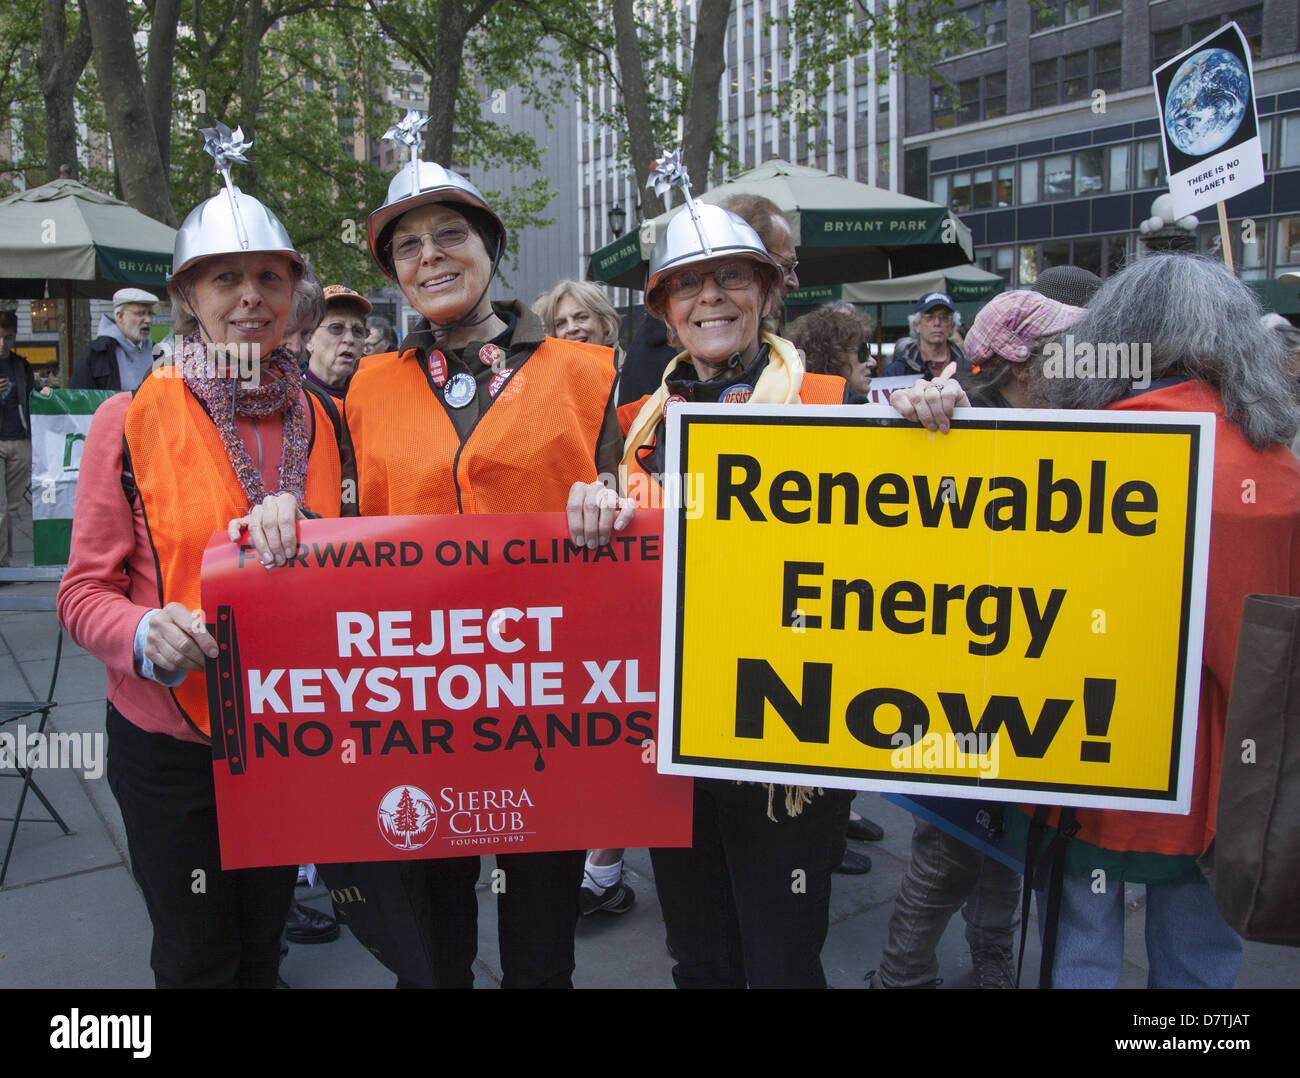 Waldorf Astoria, New York. USA. 13th May 2013. Environmentalists came out in force to greet President Obama at the Waldorf Astoria where he came for a Democratic Party fundraiser, telling him to stop the Keystone XL tar sands pipeline from being built in the US and to immediately invest heavily in renewable non polluting forms of energy such as wind, solar, wave, geothermal  and save the planet and future generations from the idiocy of continuing our present energy policy. Credit: David Grossman /Alamy Live News Stock Photo